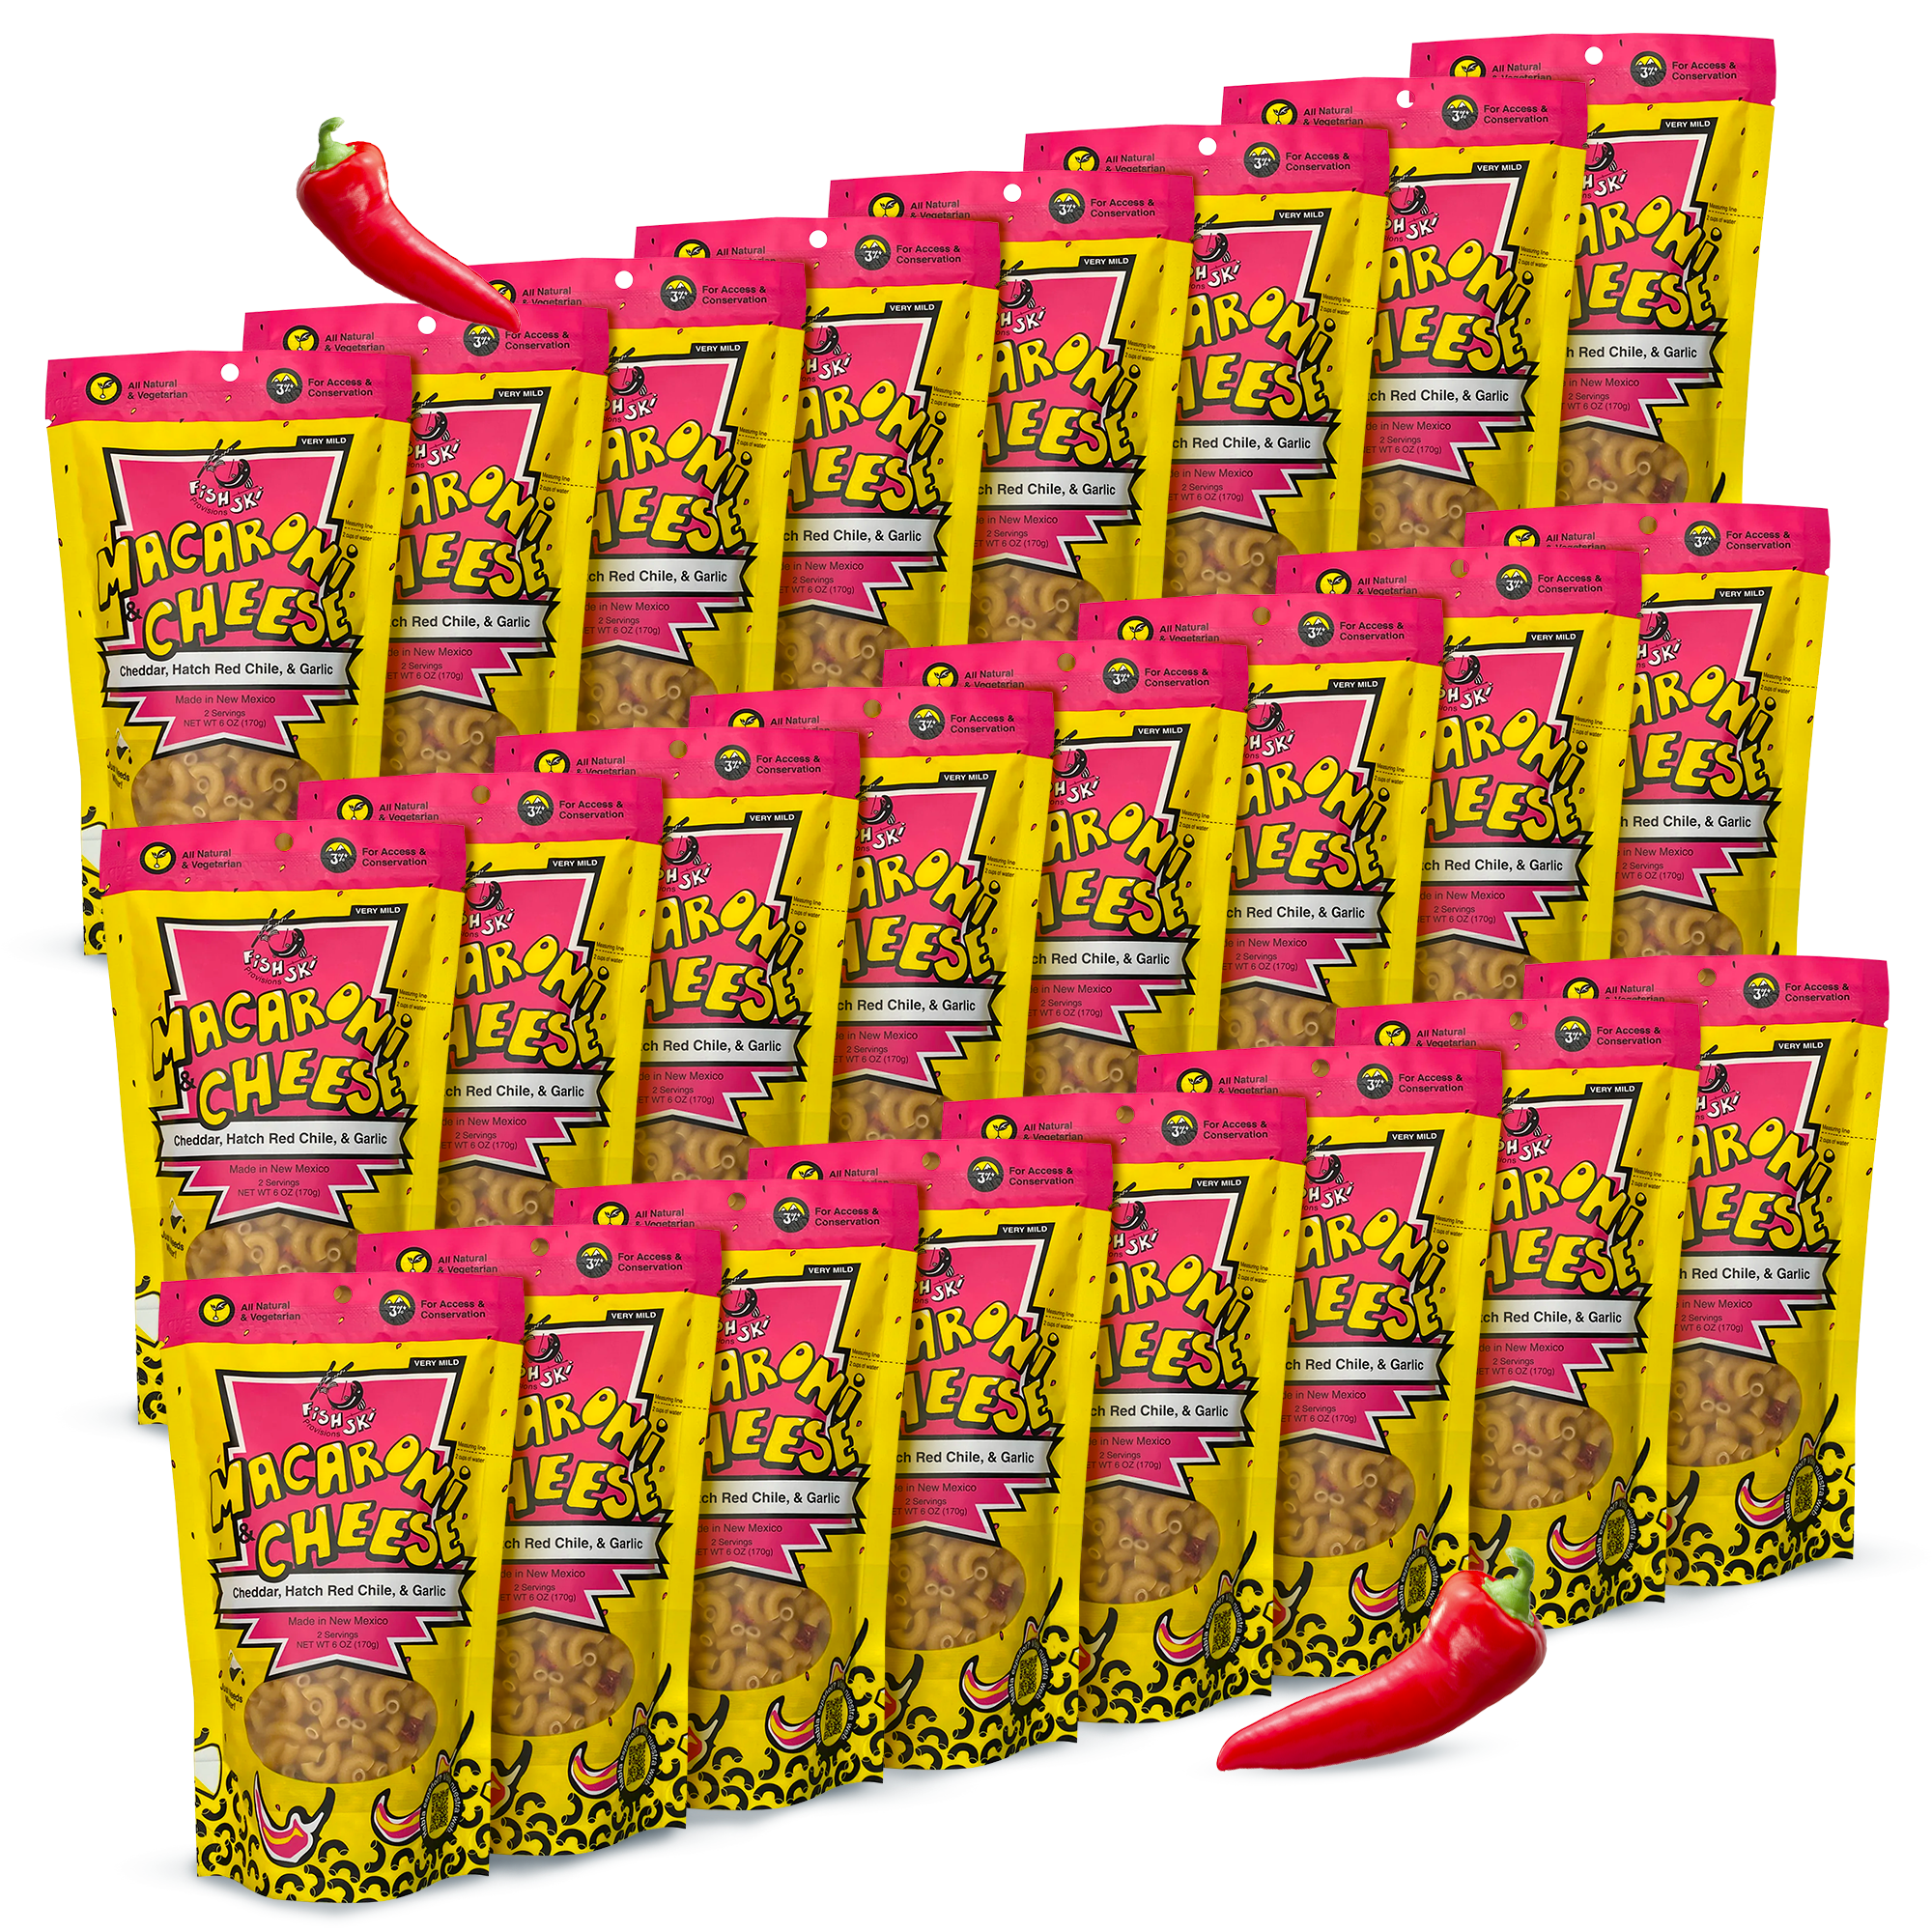 FishSki Provisions Hatch Red Chile Cheddar Macaroni and Cheese 32 pack - image 1 of 4